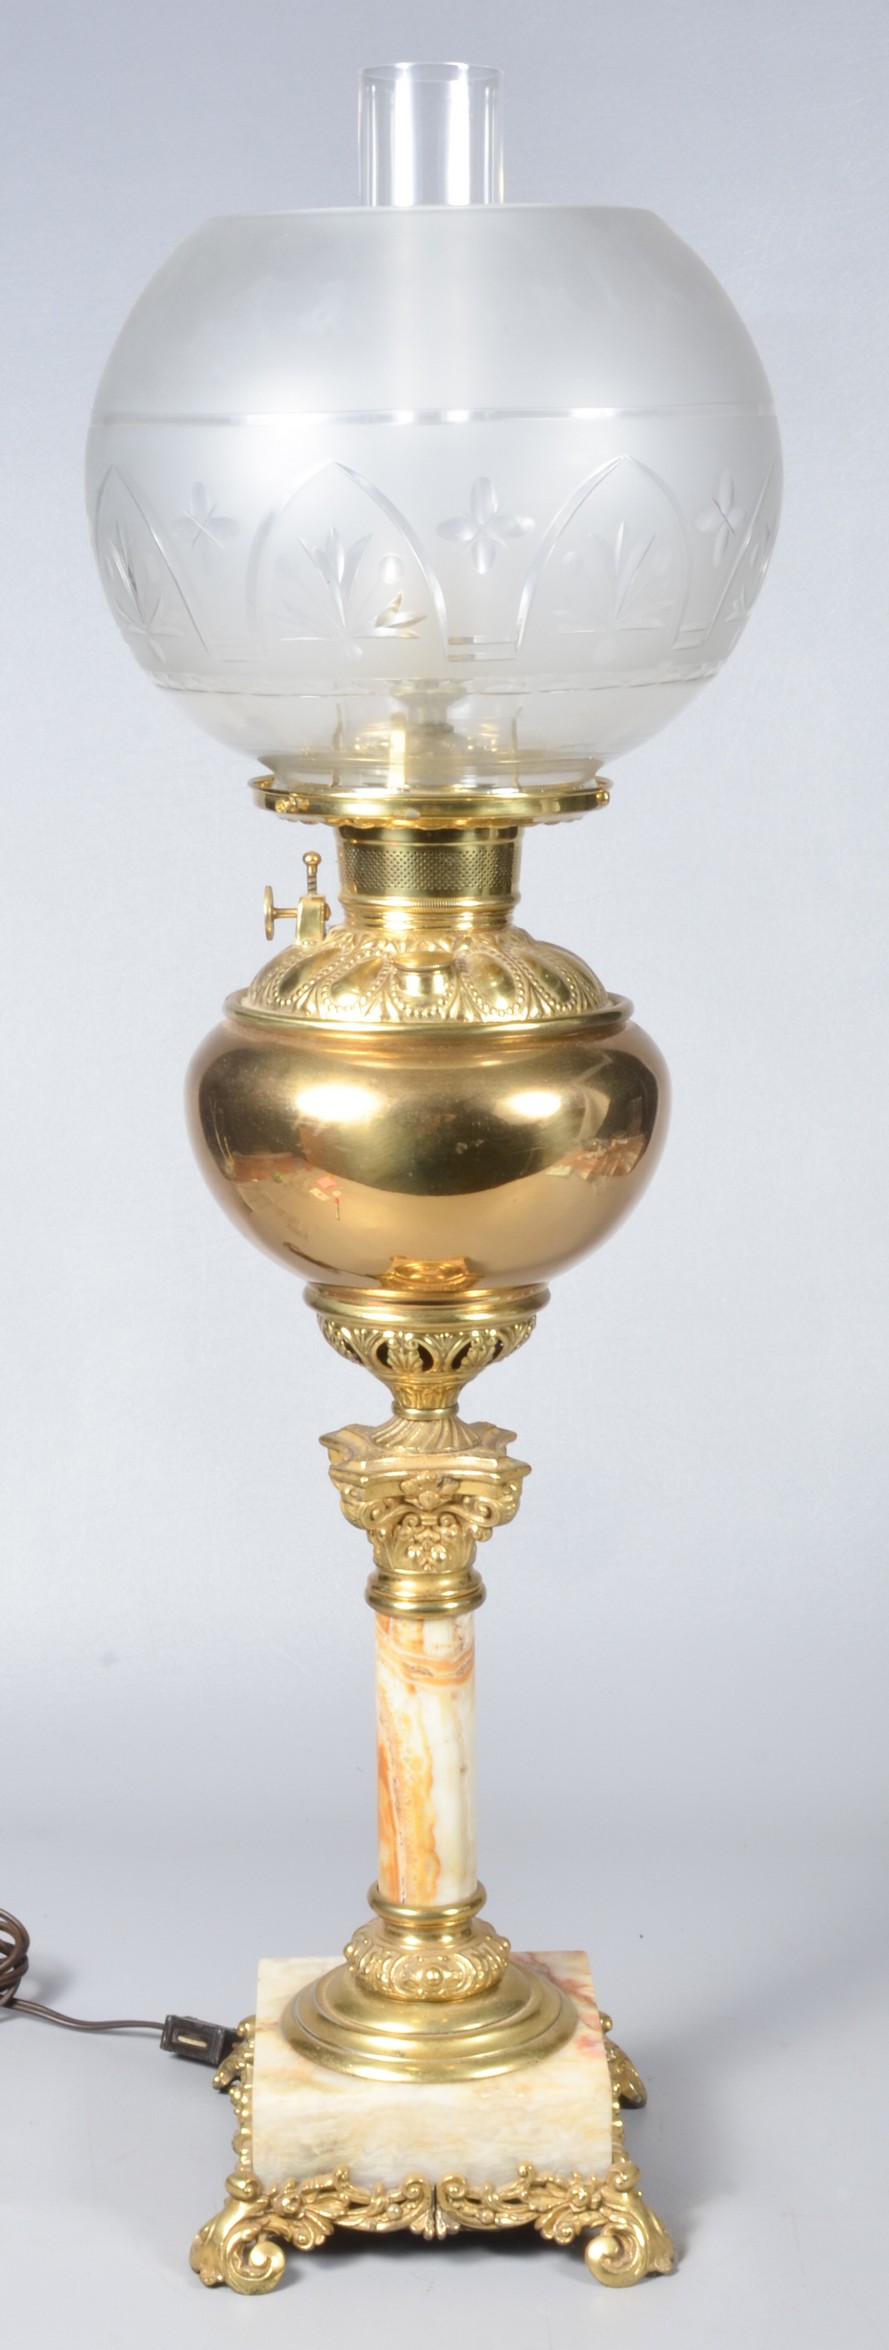 Brass & marble banquet lamp, frosted